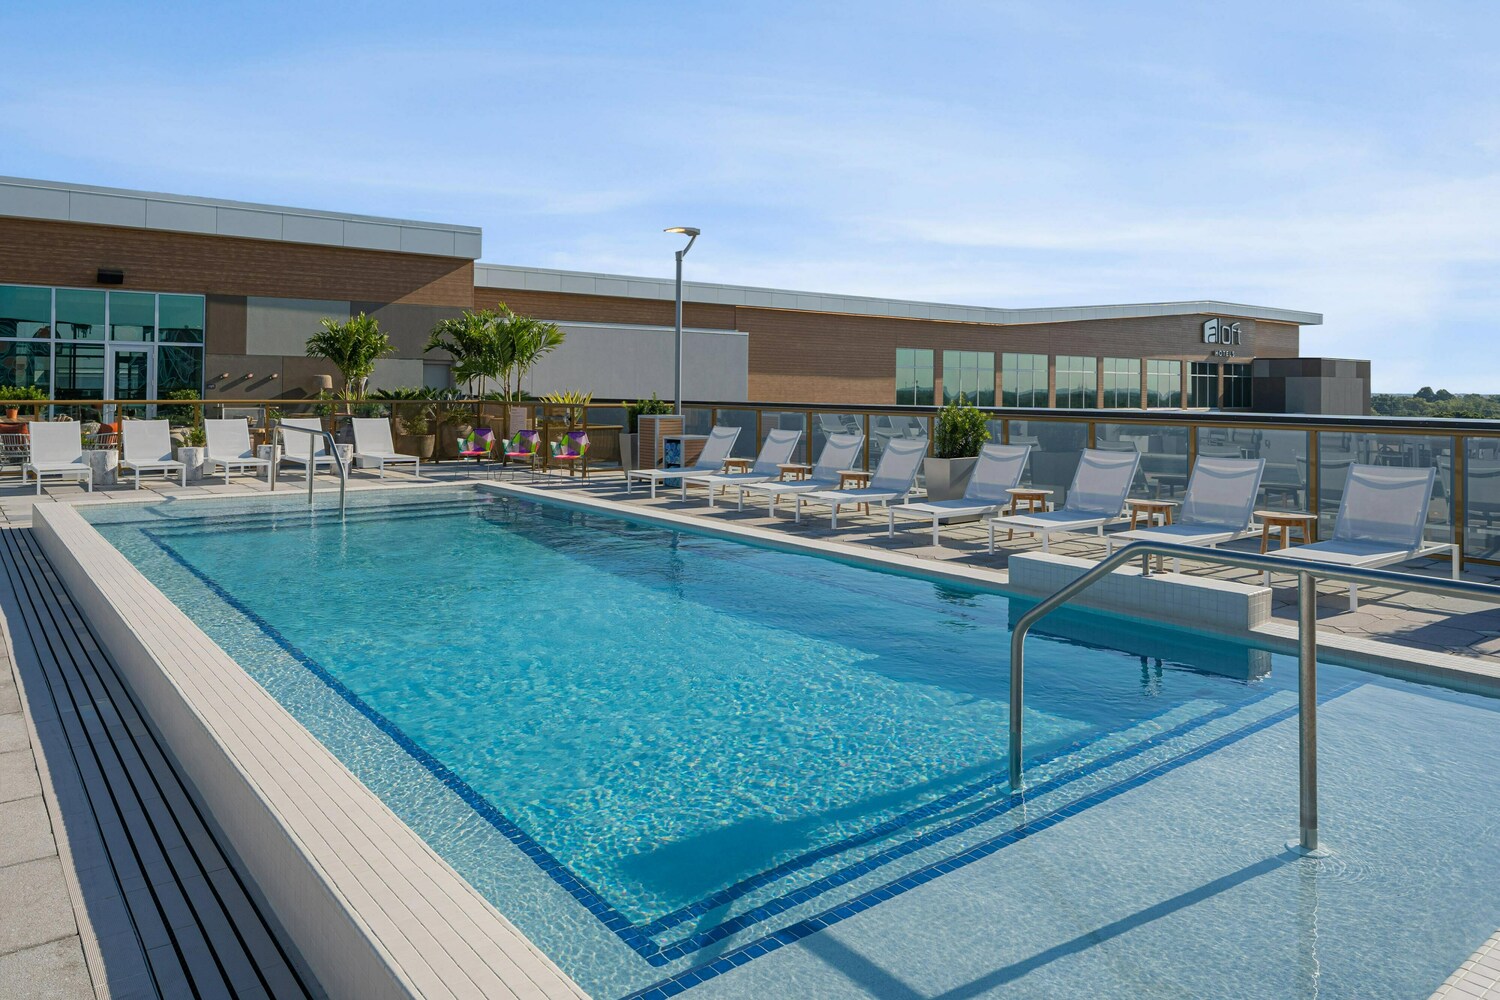 Take a refreshing dip in our beautiful rooftop pool where you'll enjoy the water and look out to the stunning views of downtown Tampa